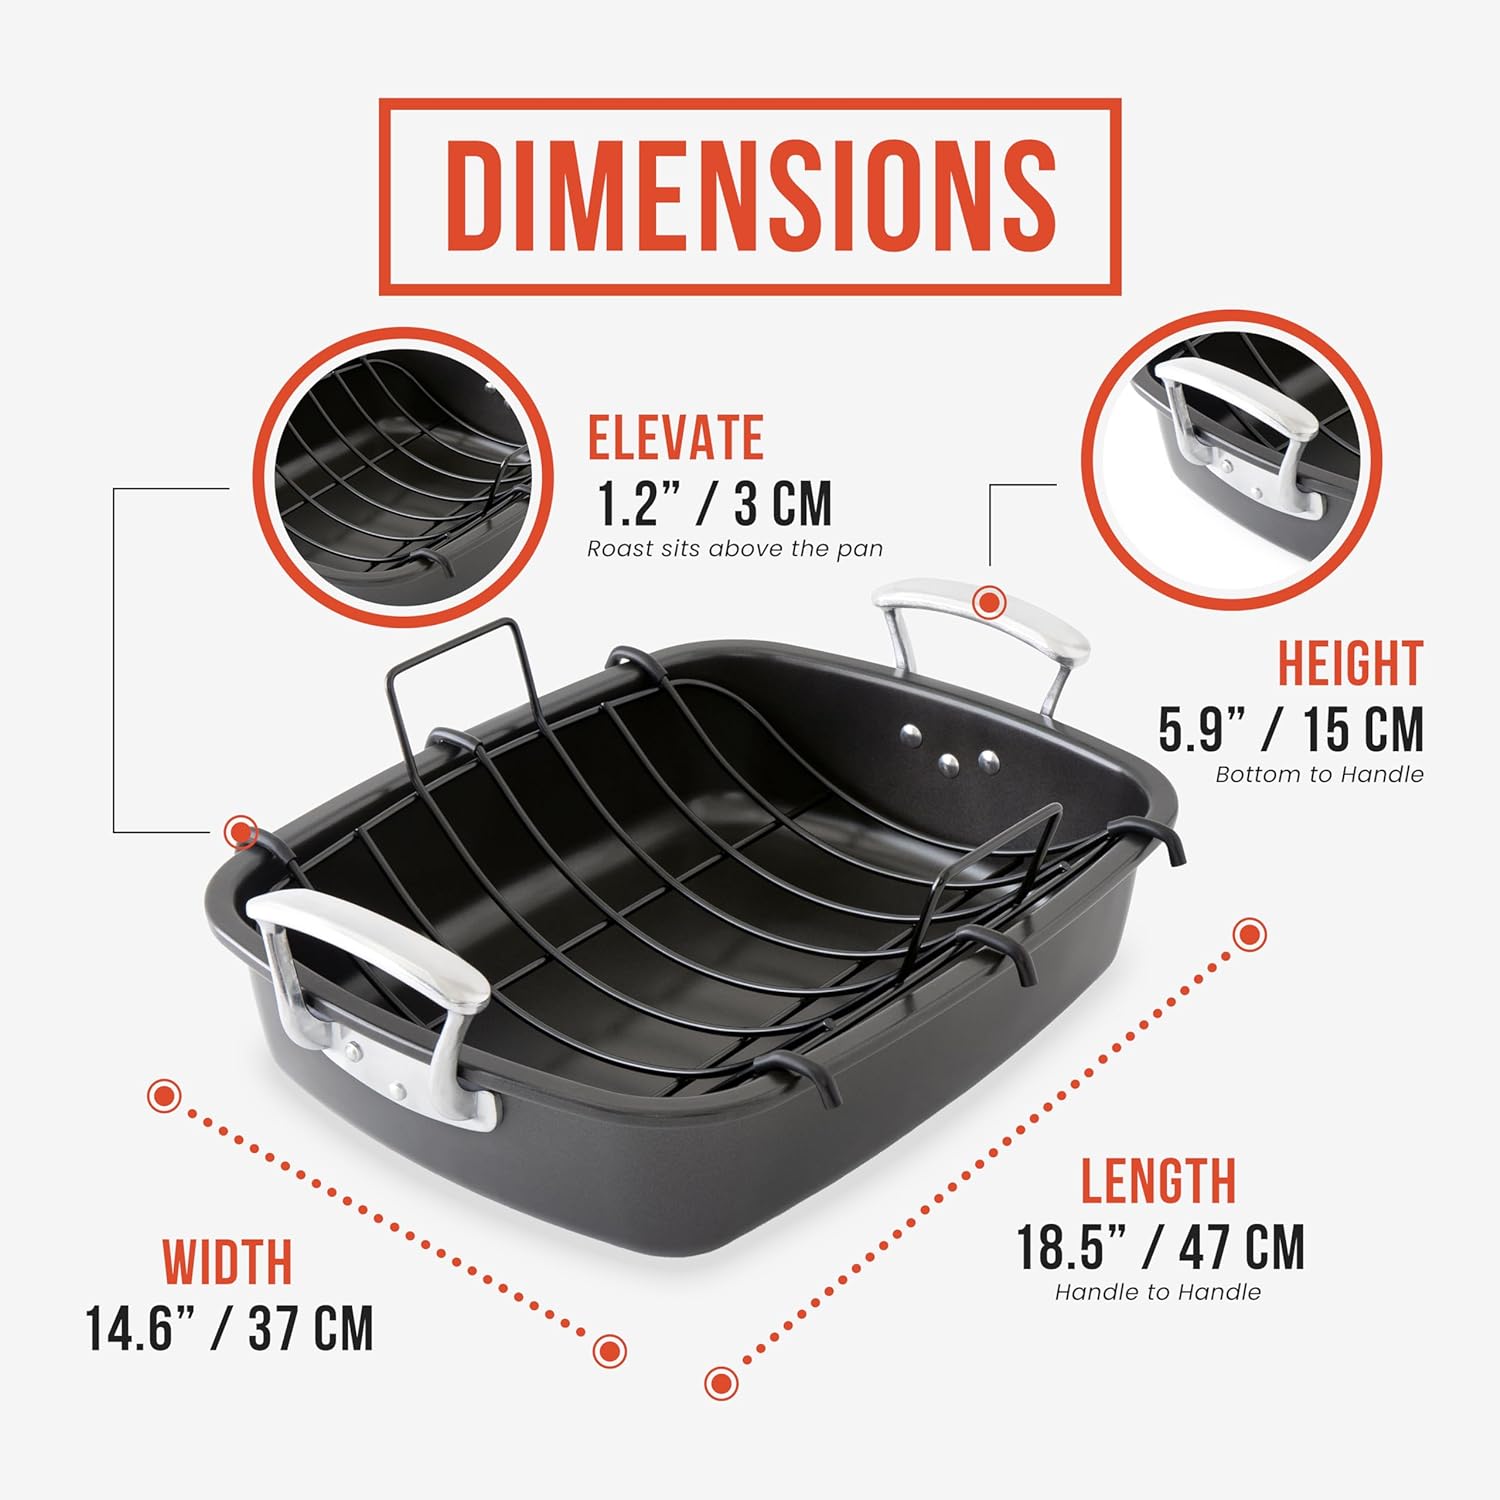  Chef Pomodoro Deluxe Large Carbon Steel Roasting Pan